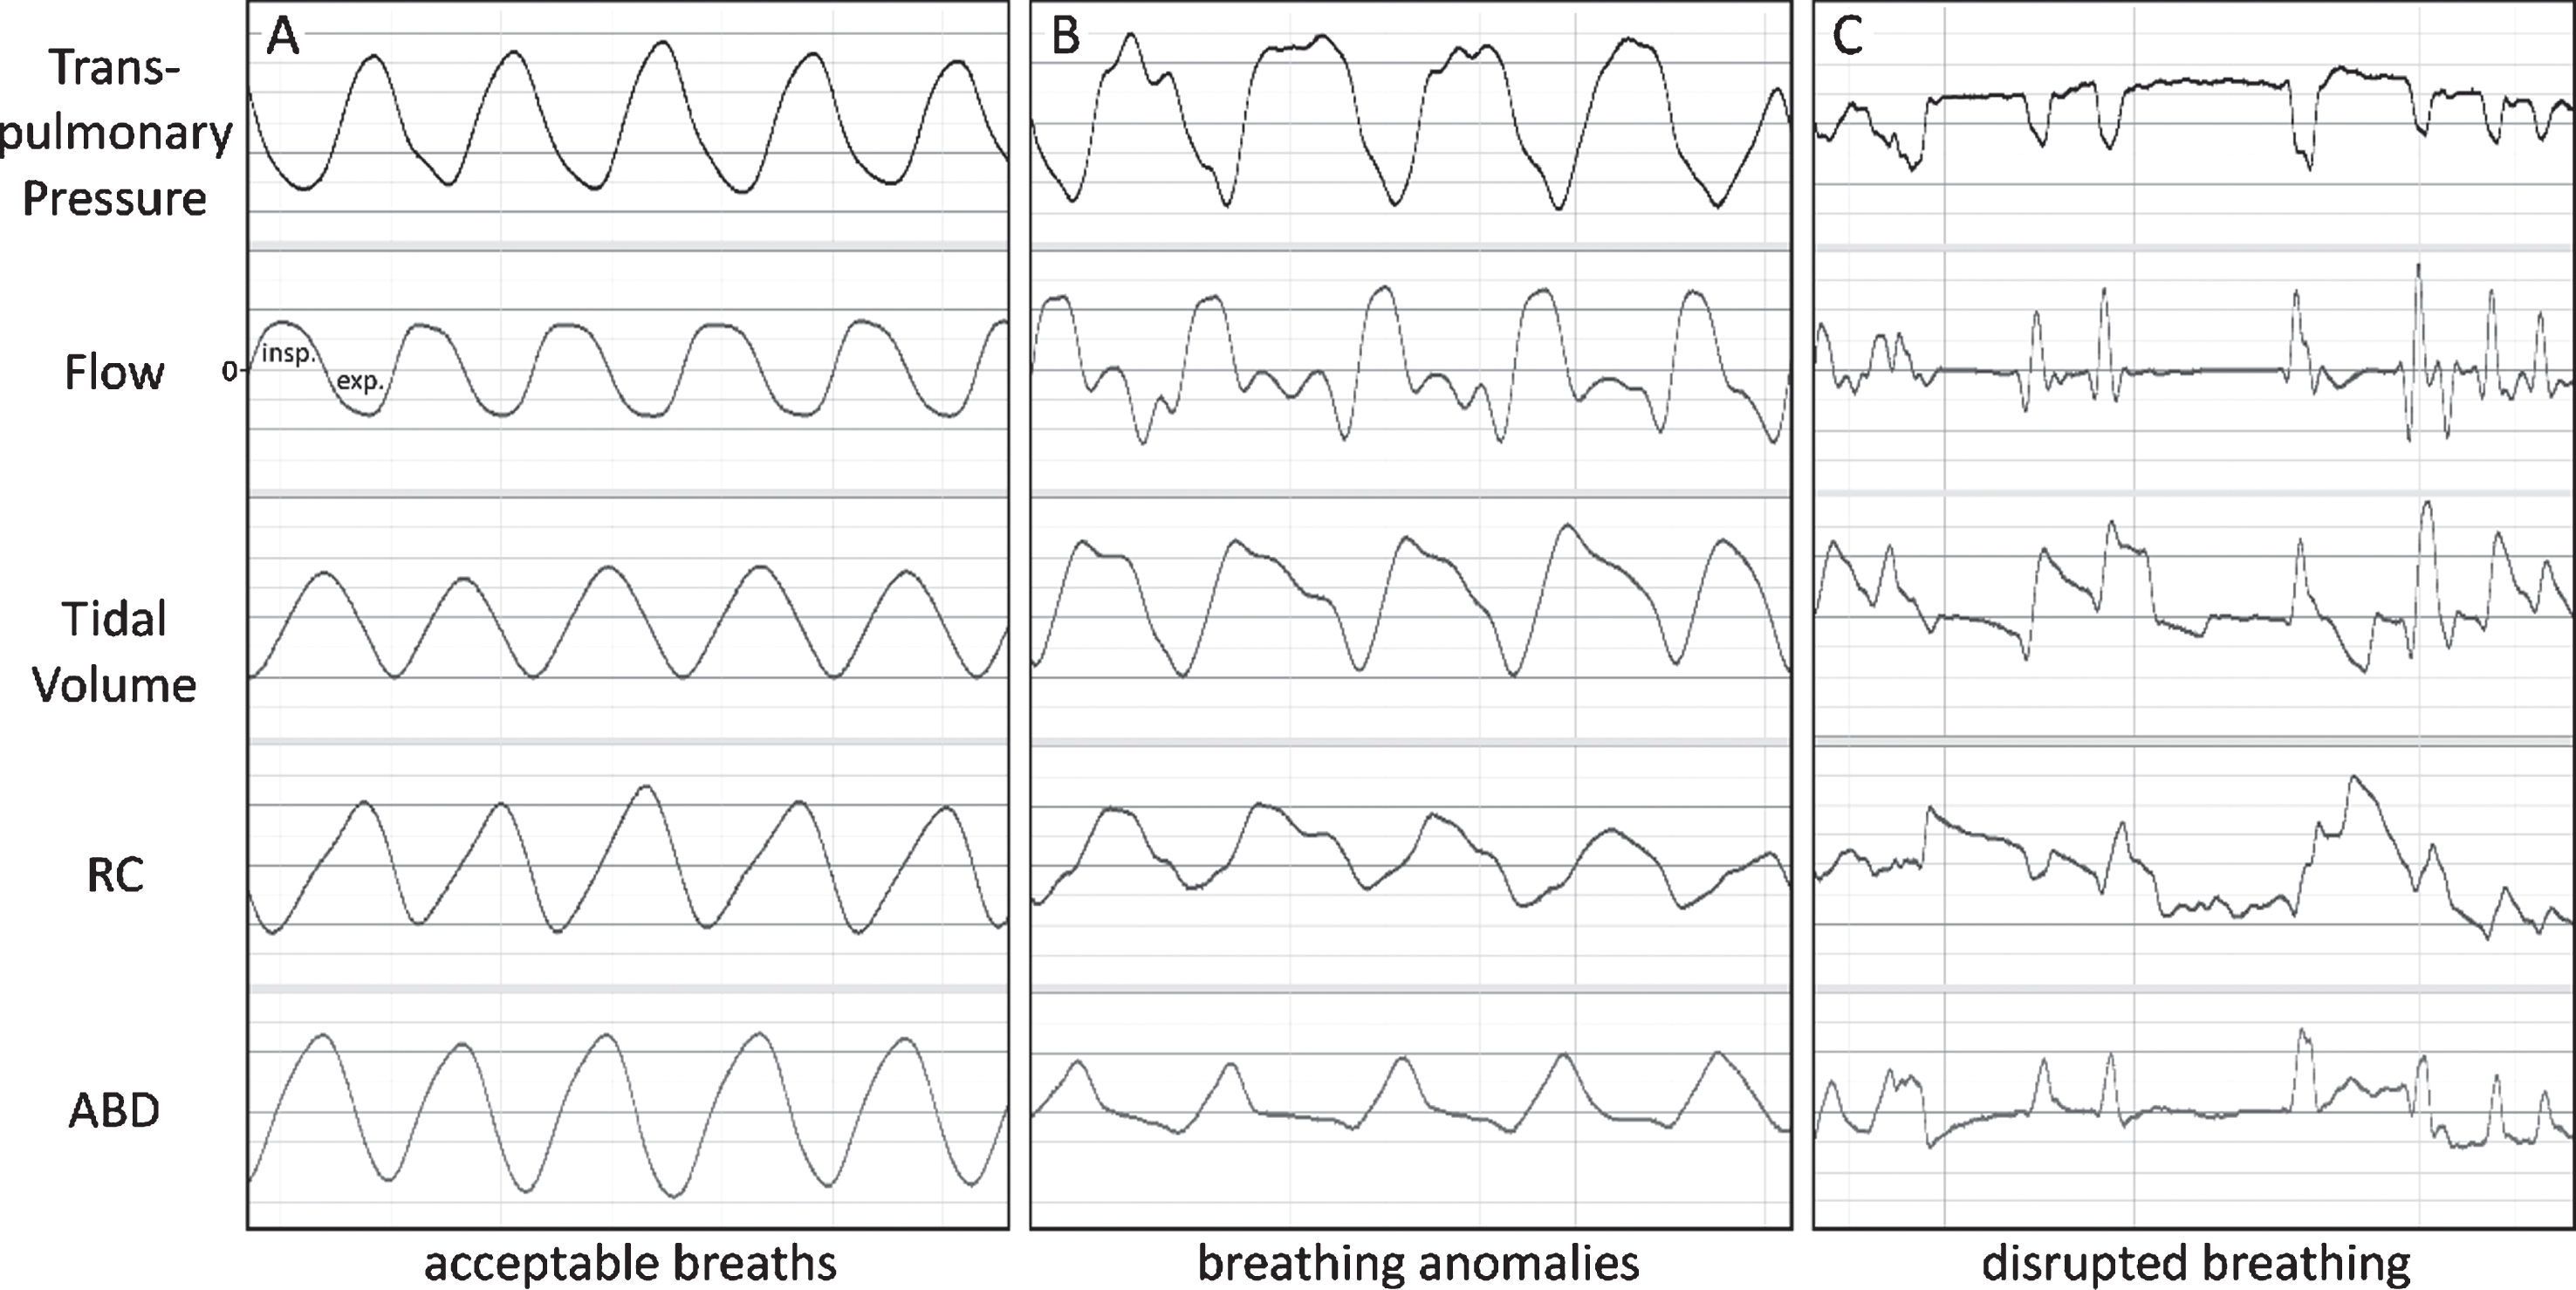 adventitious breath sounds in infant